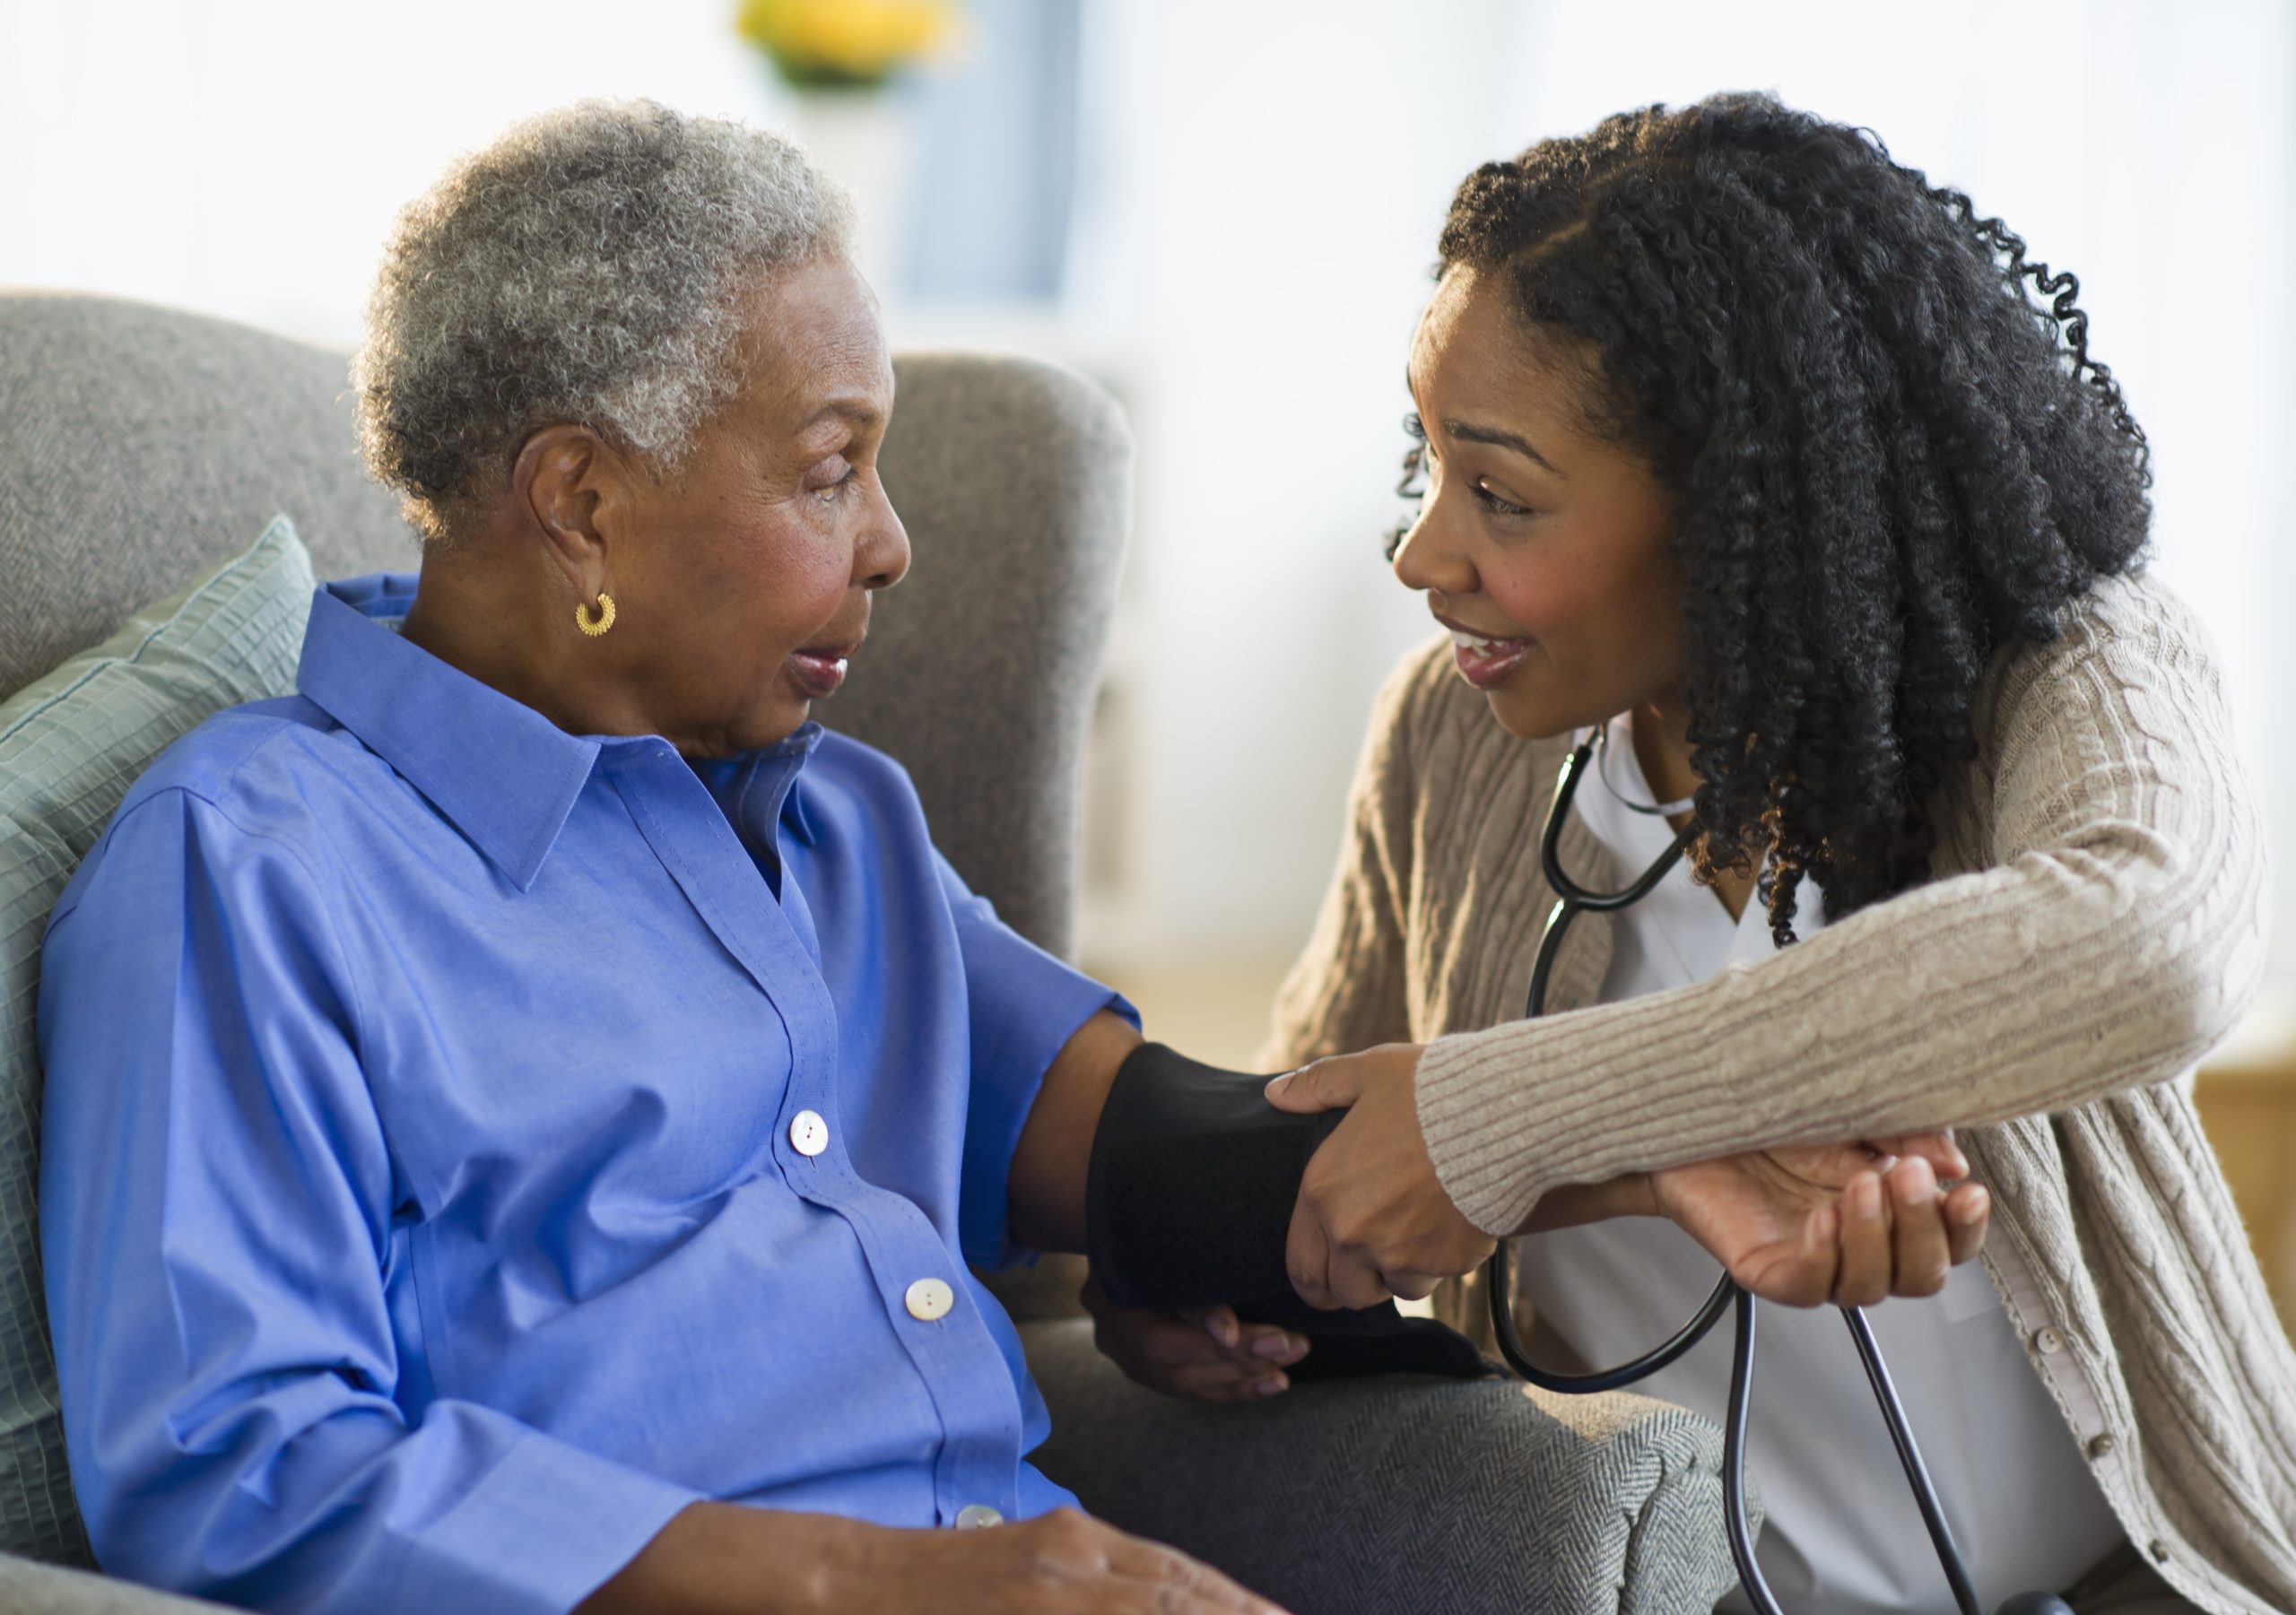 Concierge Care vs. Direct Care: The Differences Matter